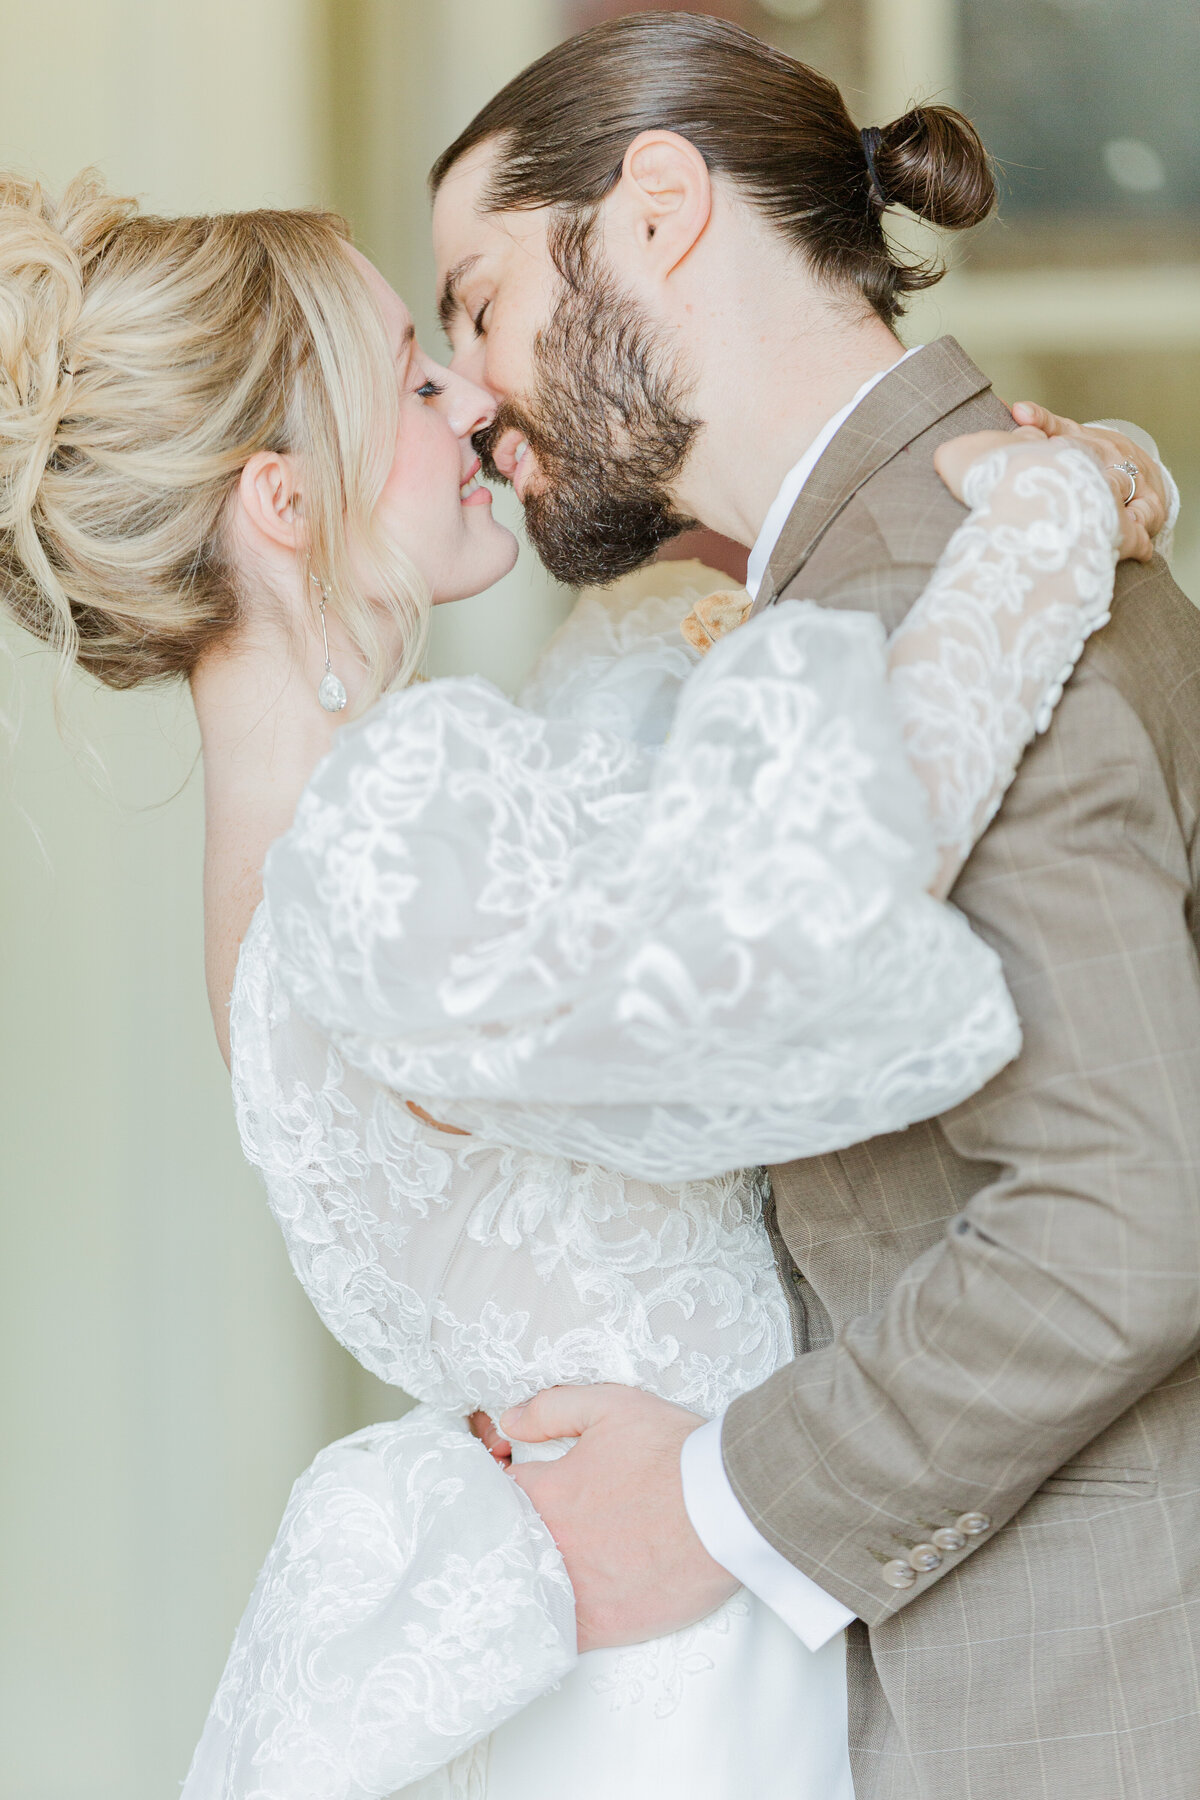 Close up image. Bride and groom share a kiss during couples photos at their North Shore Boston Wedding. Captured by Lia Rose Weddings, New England and Destination Wedding Photographer